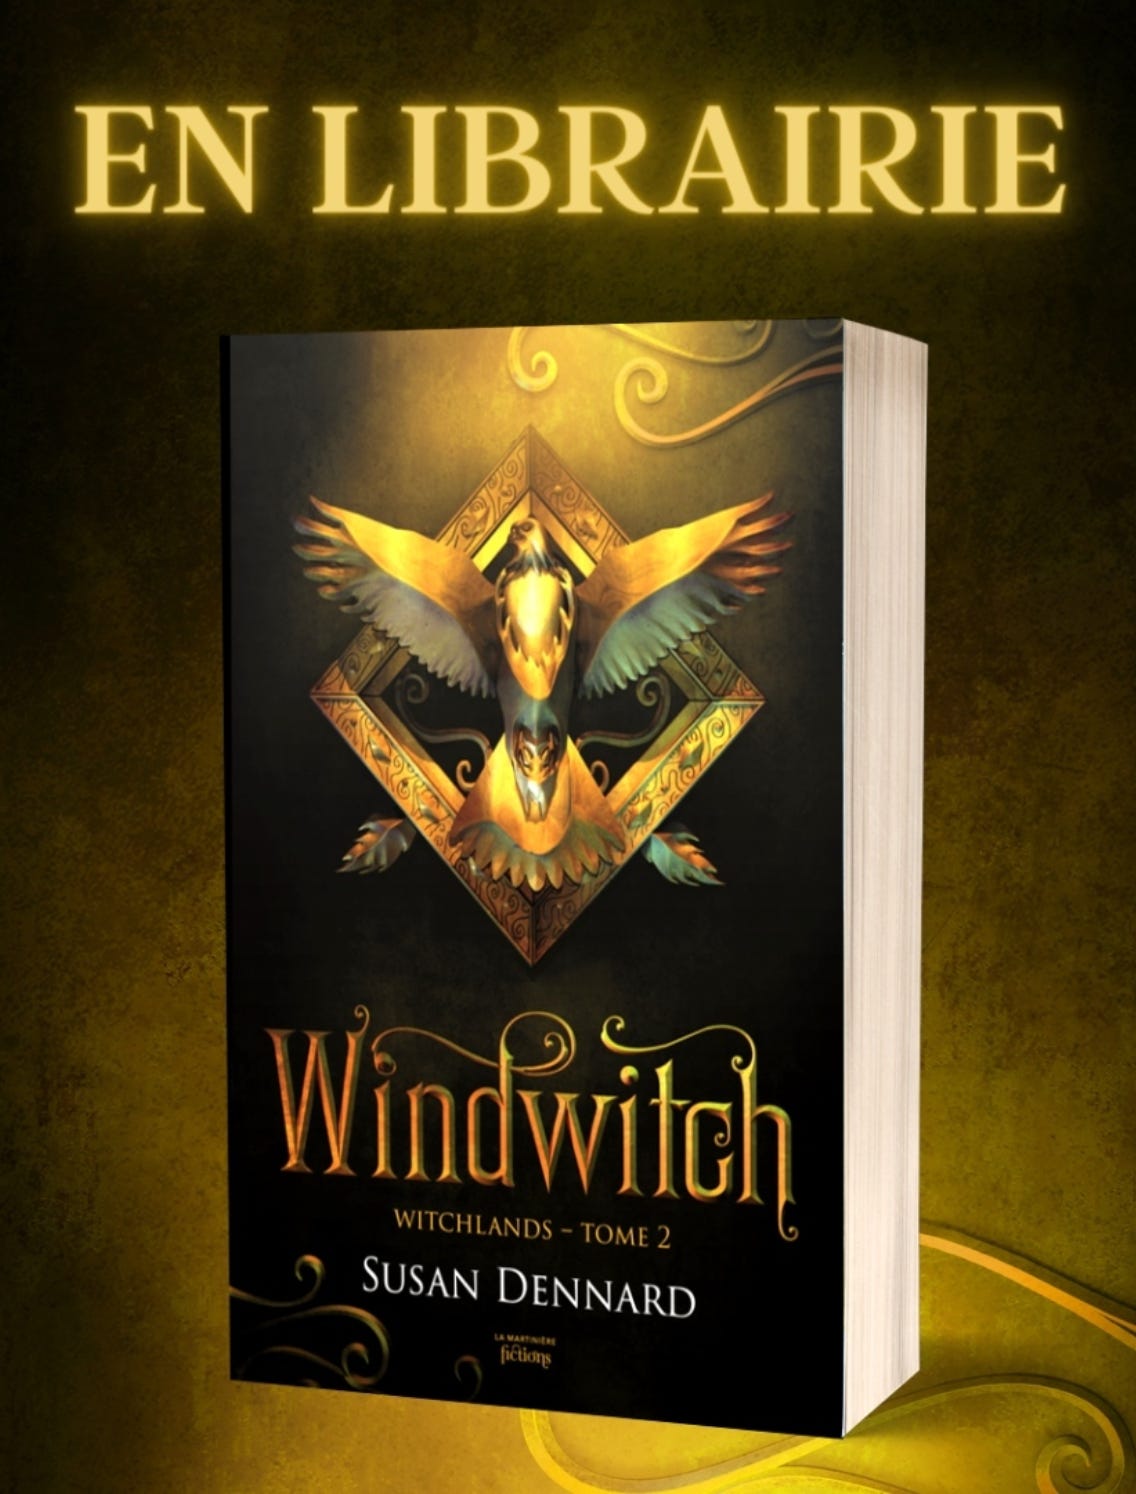 French edition of Windwitch with a golden flame hawk symbol on the front